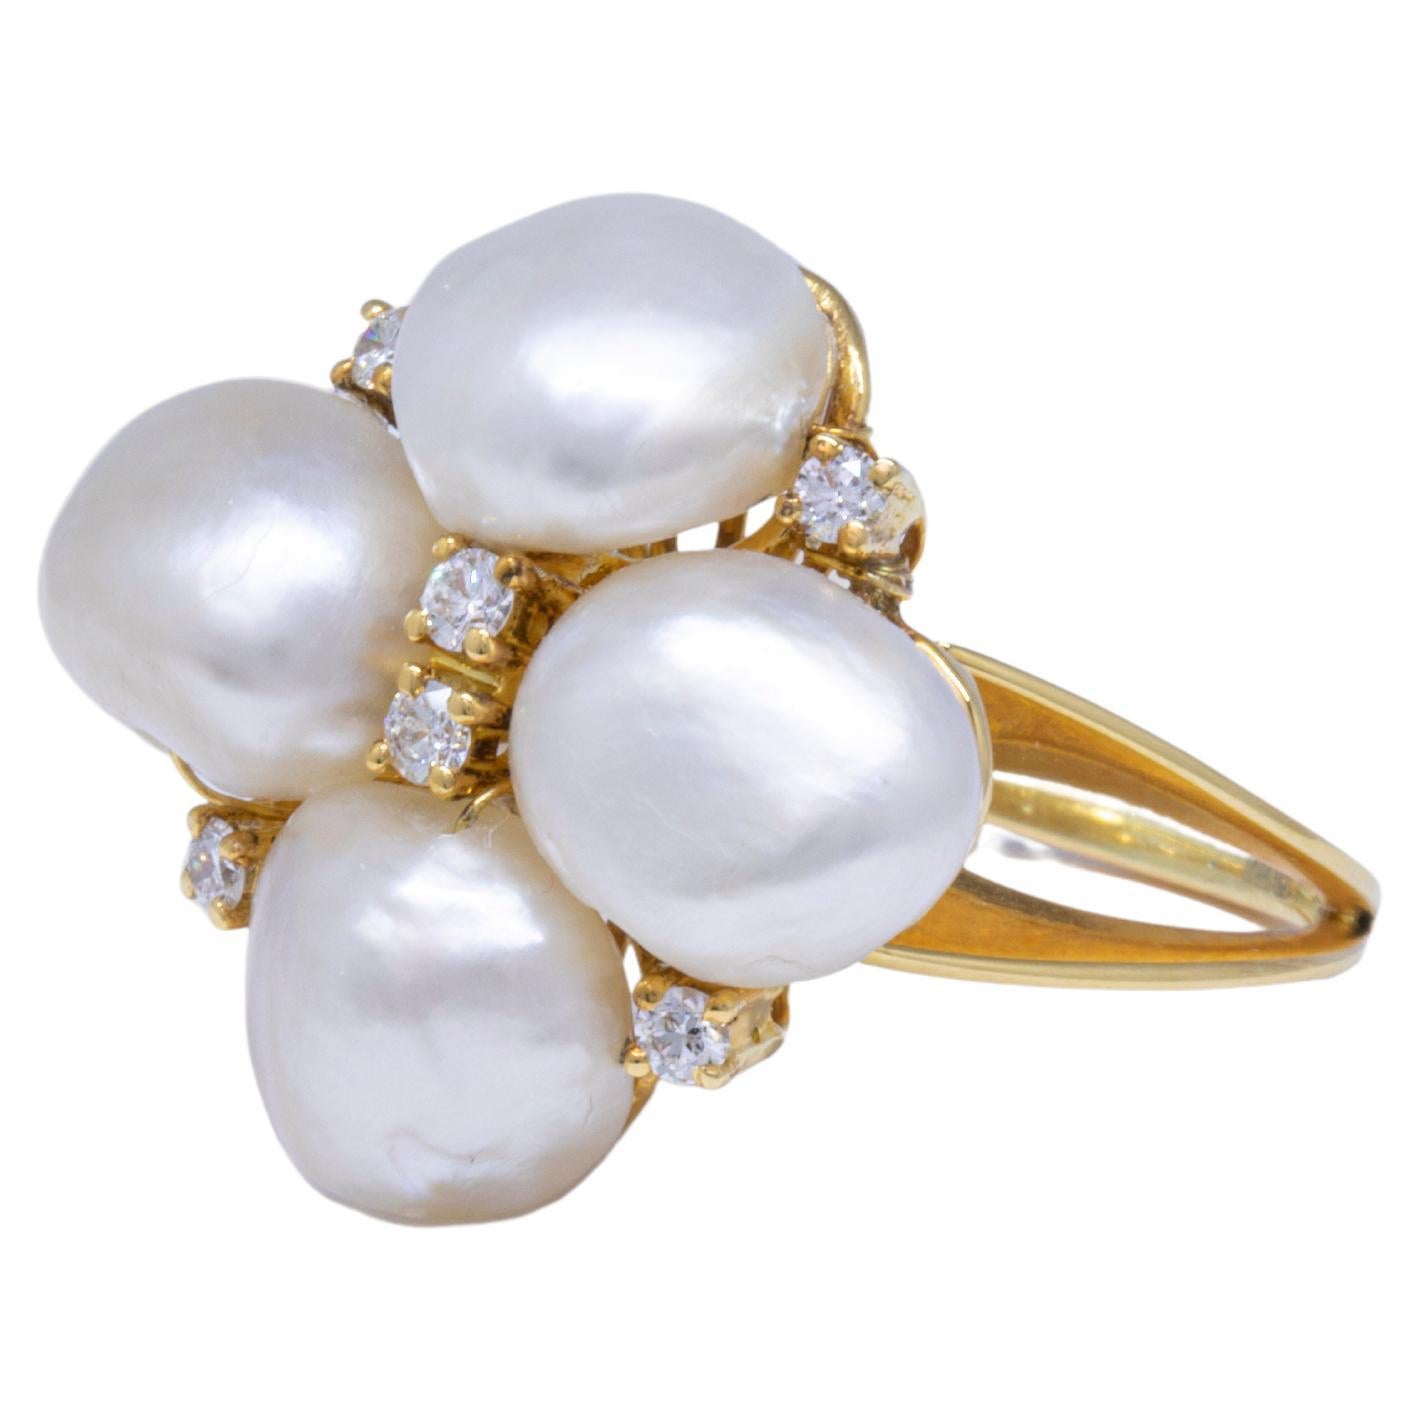 Certified 17.84 Ct. Natural Baroque Pearls Statement Ring with Diamond